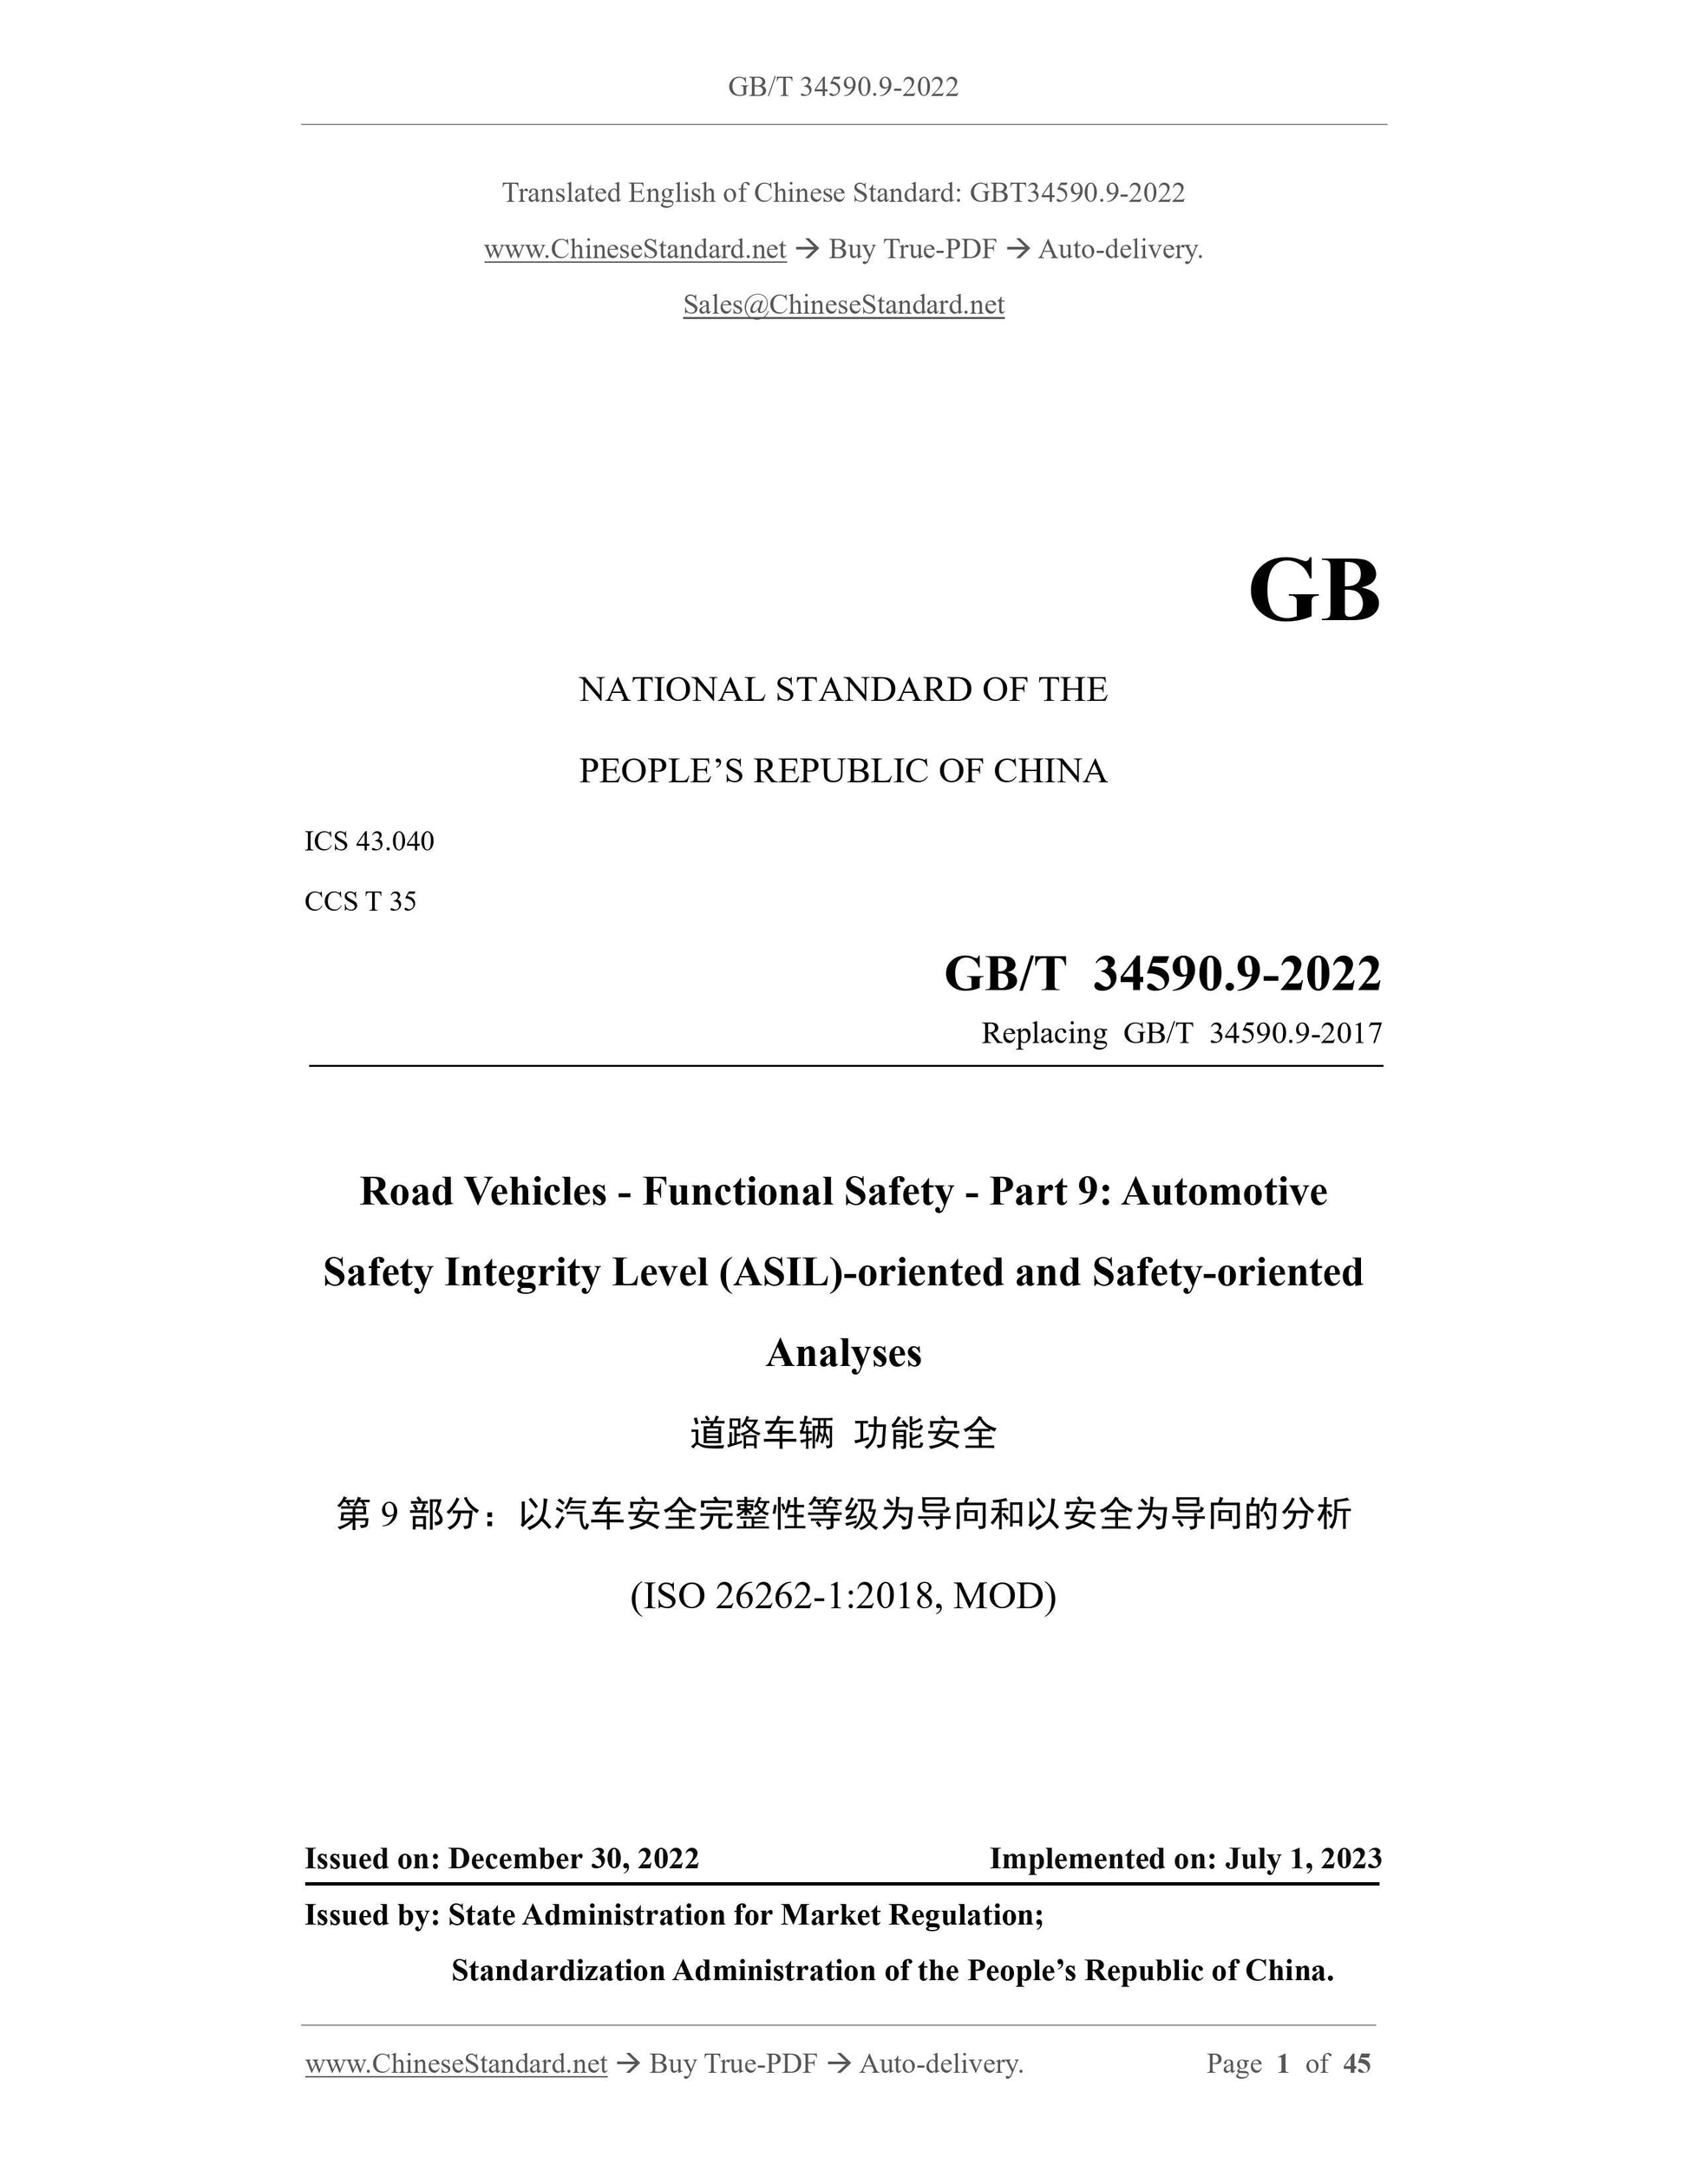 GB/T 34590.9-2022 Page 1